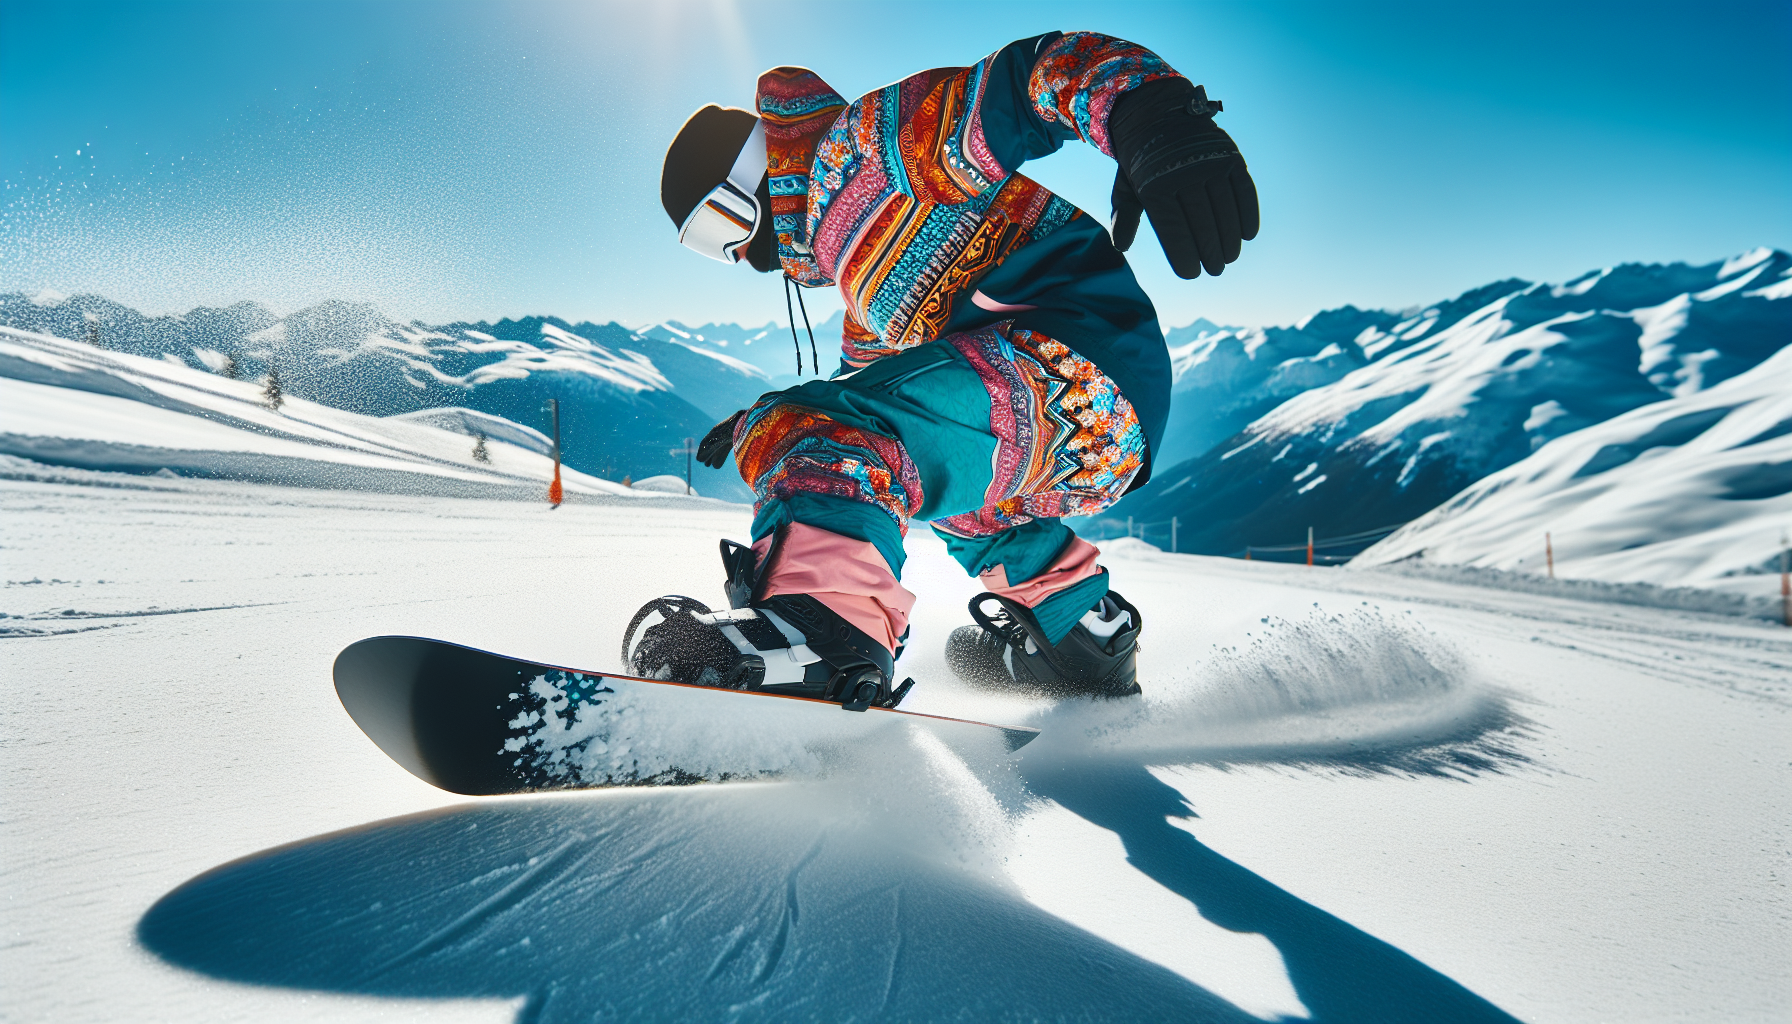 Snowboarder demonstrating balanced body positioning for buttering